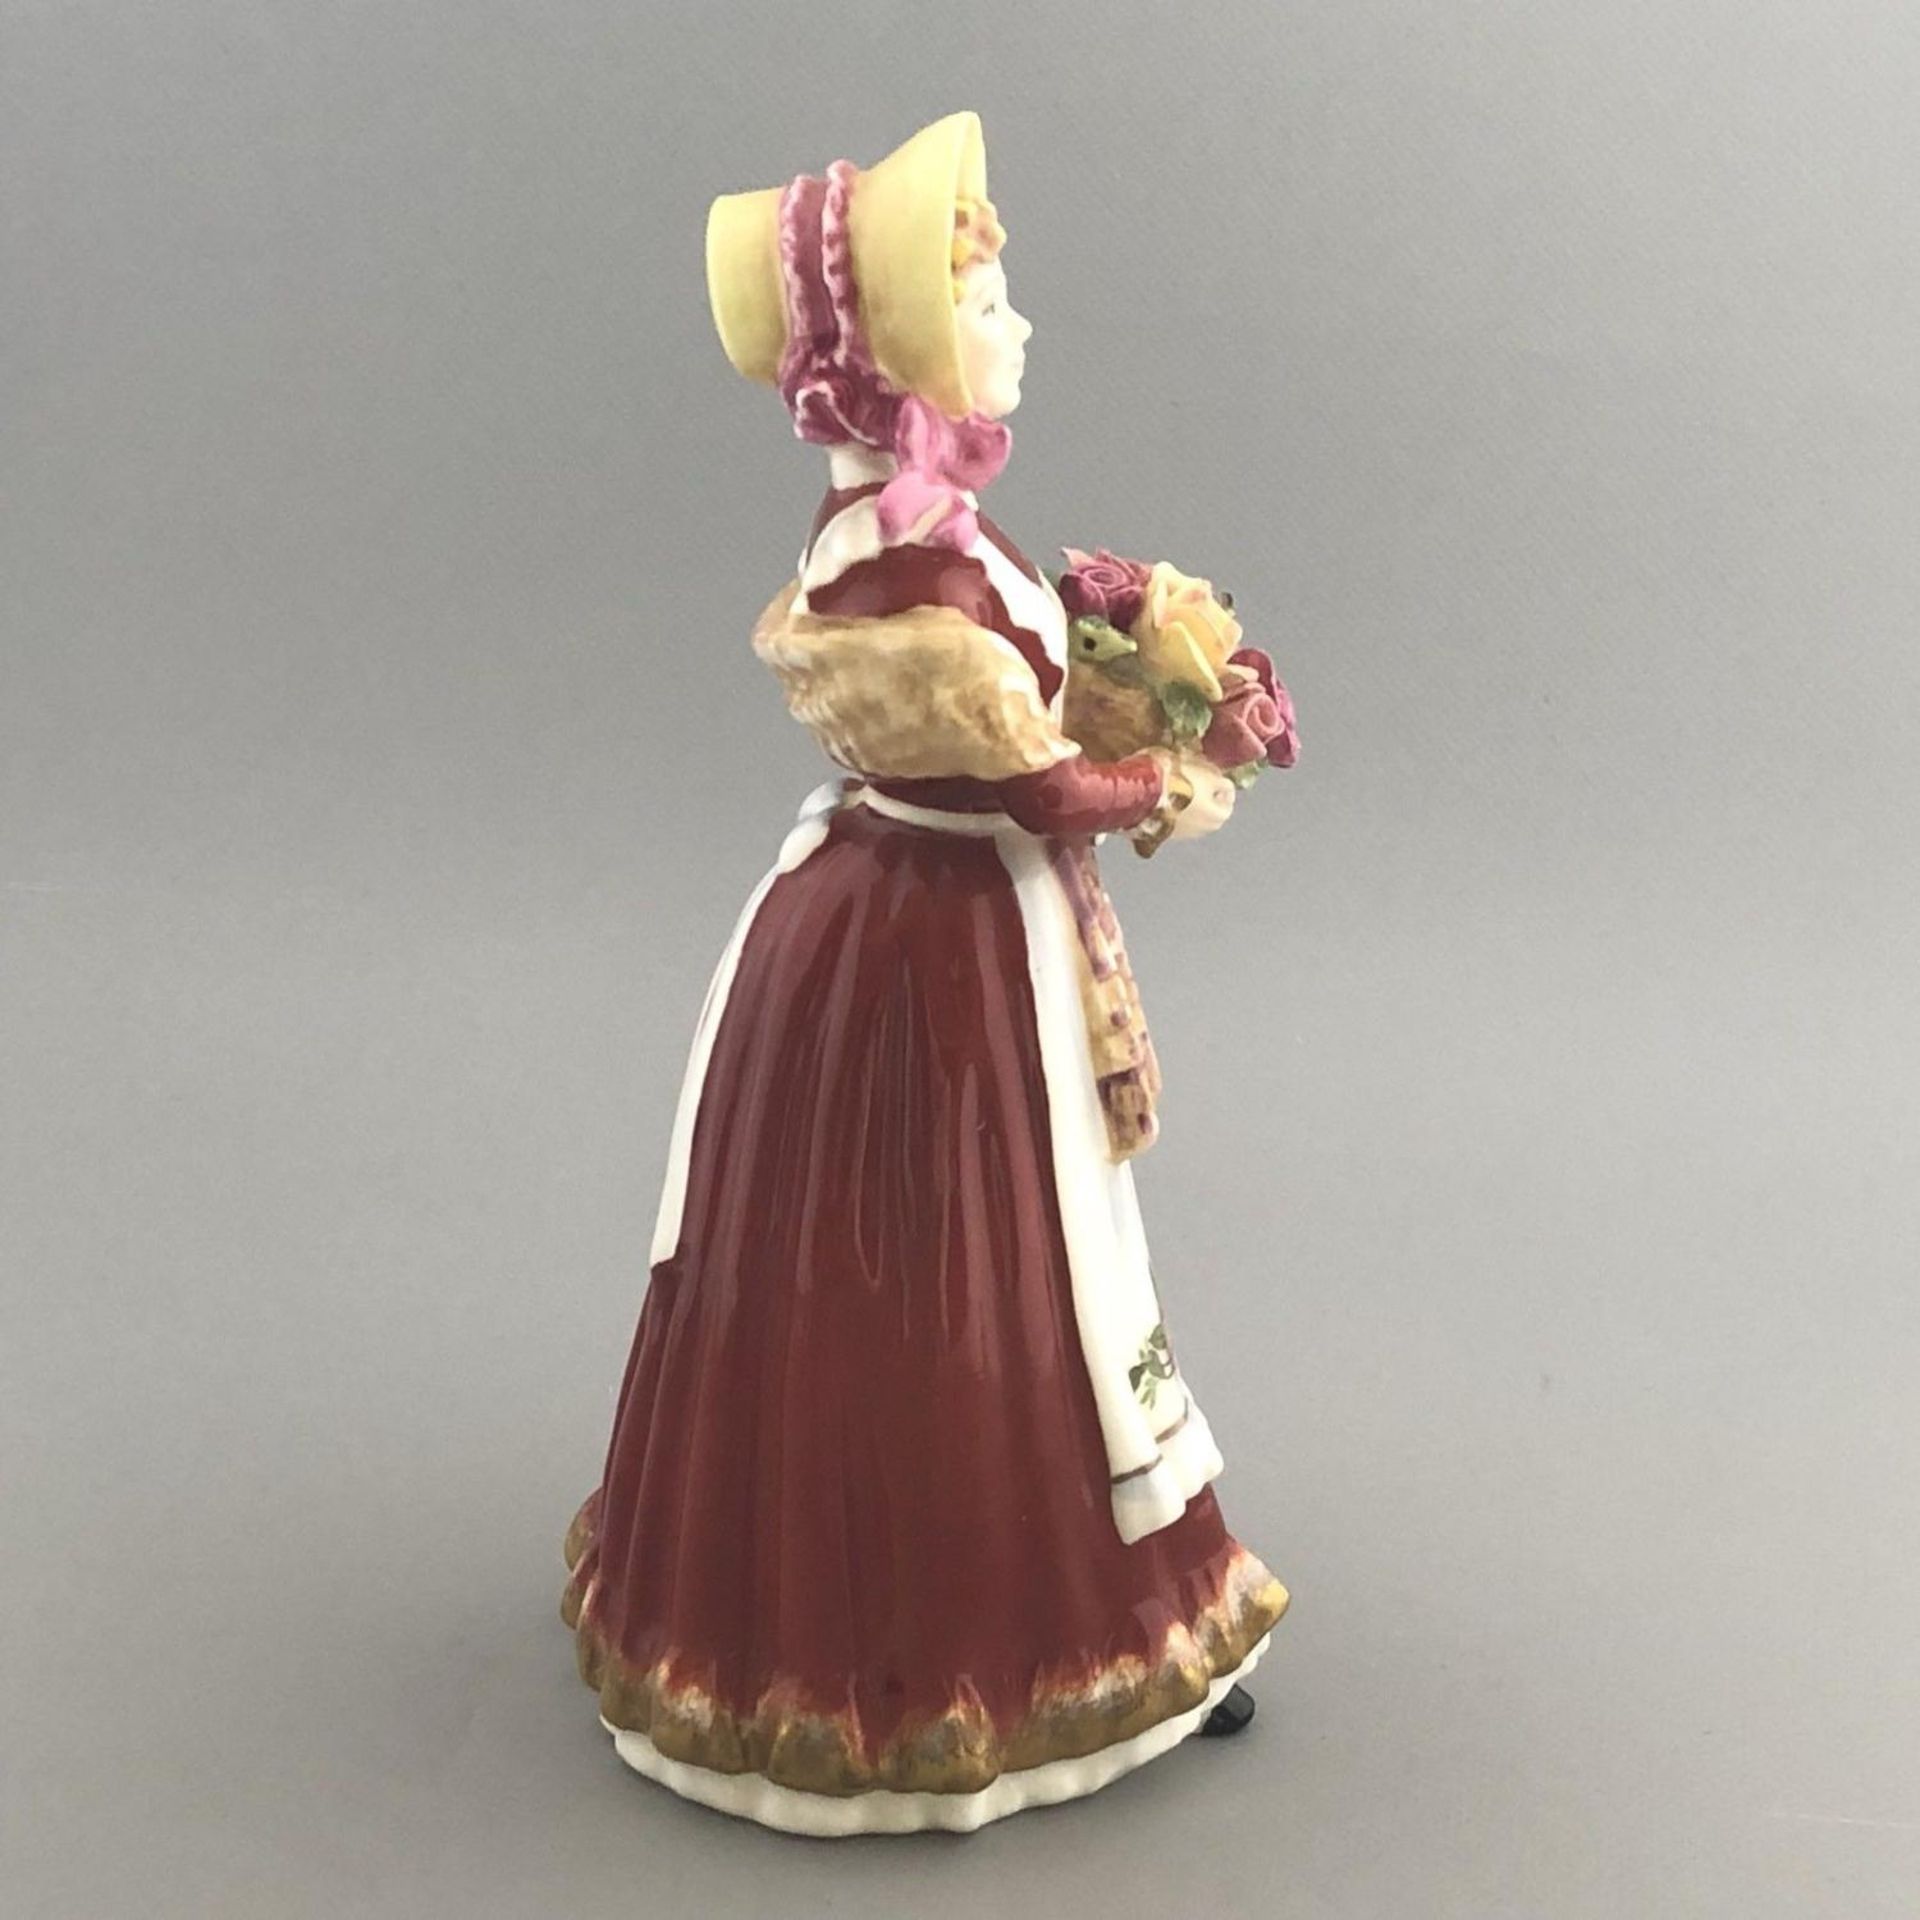 English Porcelain Figurine "Old Country Roses" - Royal Doulton HN 3692 - Image 4 of 7